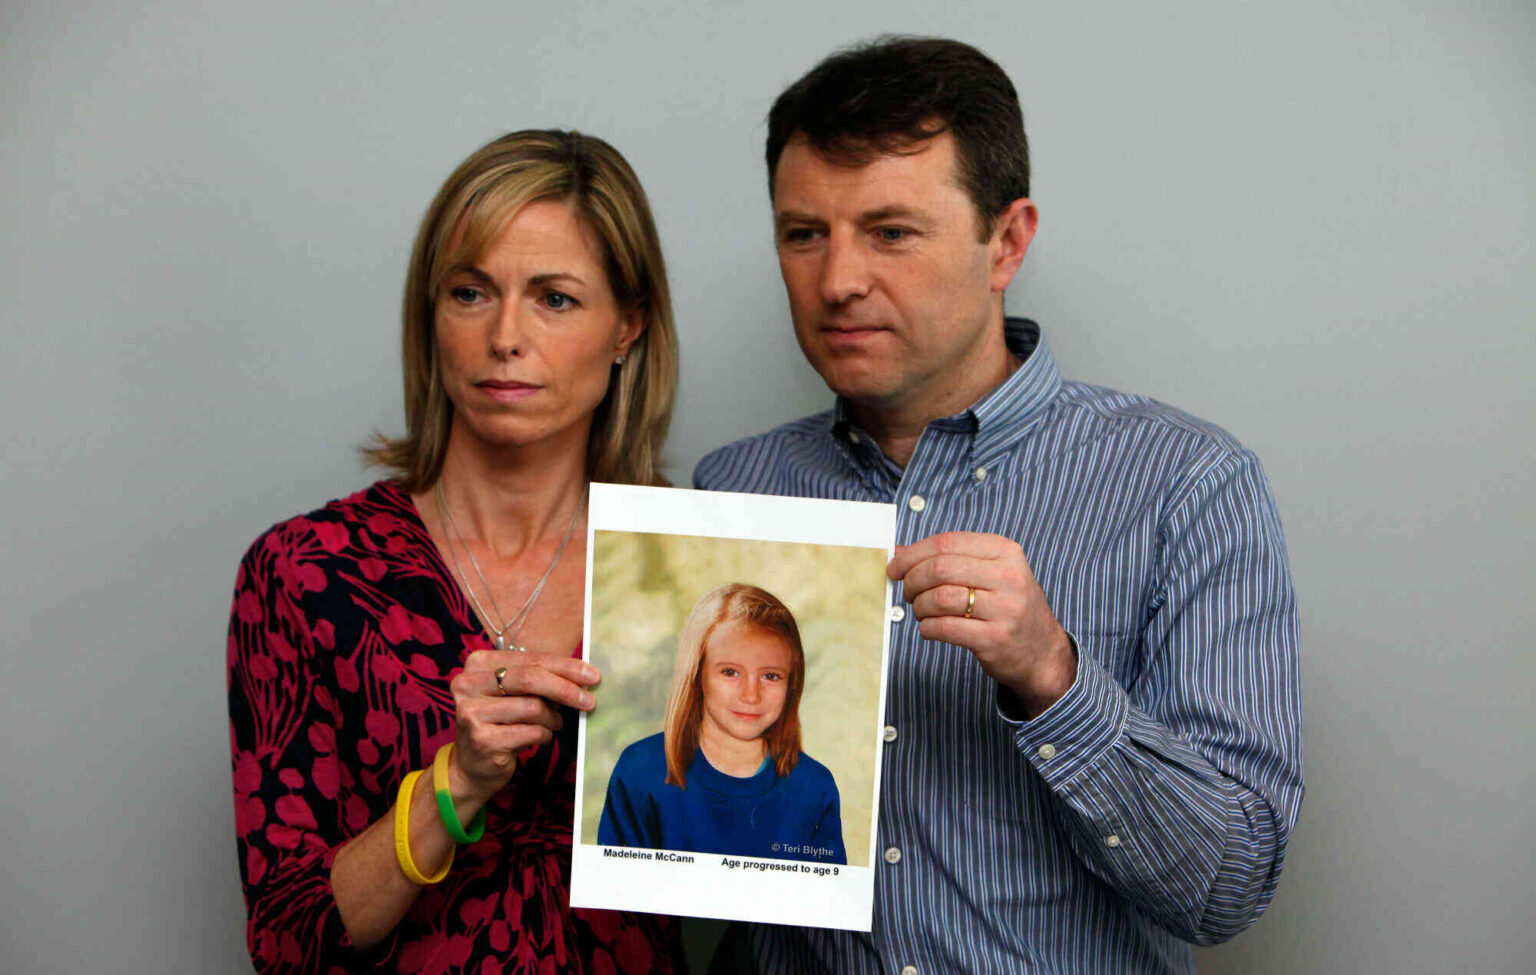 Over a decade has passed, yet there's still no answer to the disappearance of Madeleine McCann. Could she still be alive? Or will this case remain unsolved?